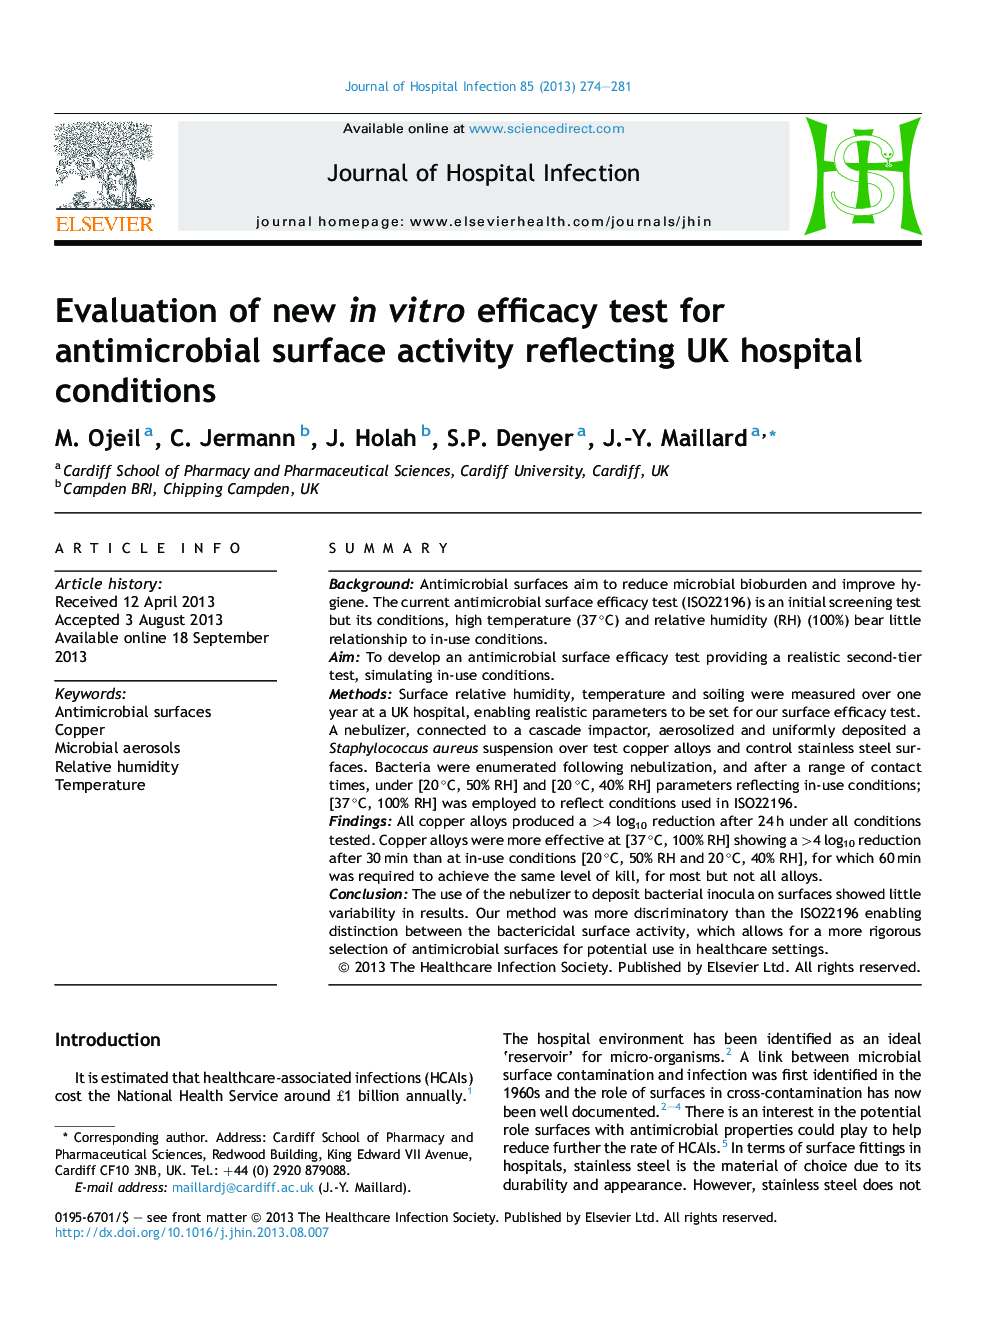 Evaluation of new in vitro efficacy test for antimicrobial surface activity reflecting UK hospital conditions